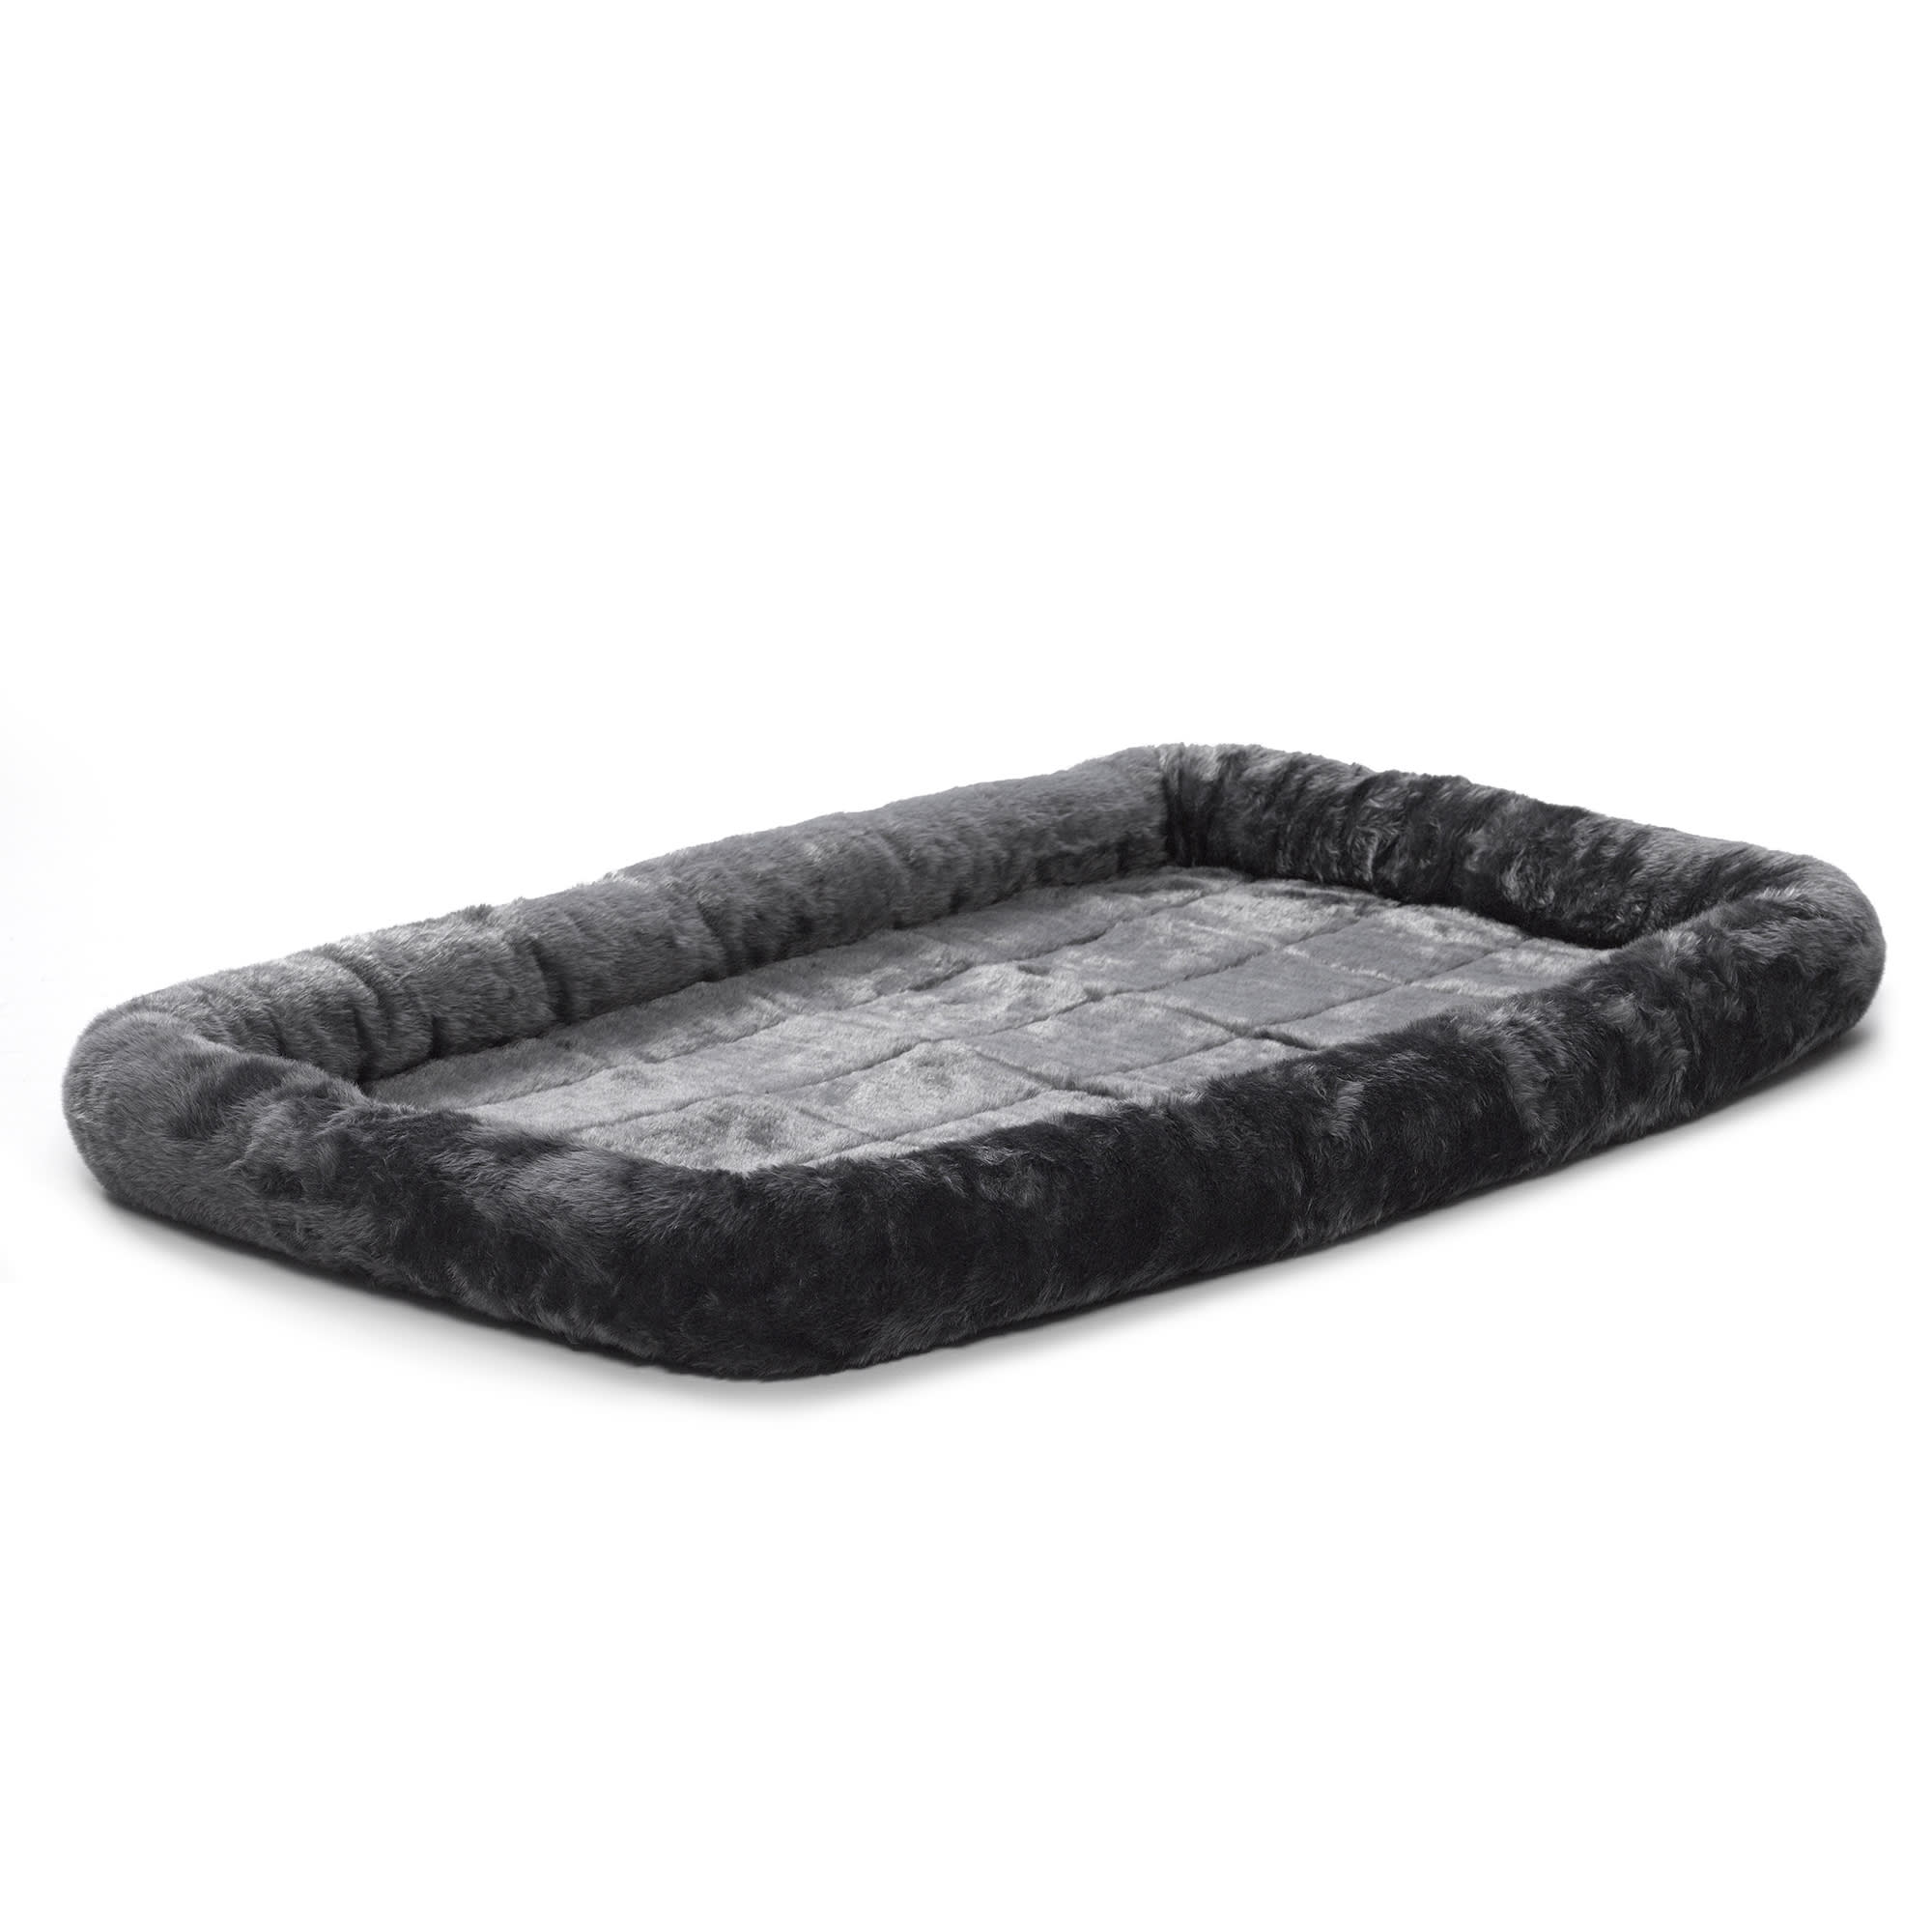 Photos - Dog Bed / Basket Midwest Quiet Time Bolster Gray Dog Bed, 42" L X 26" W, X-Large, G 